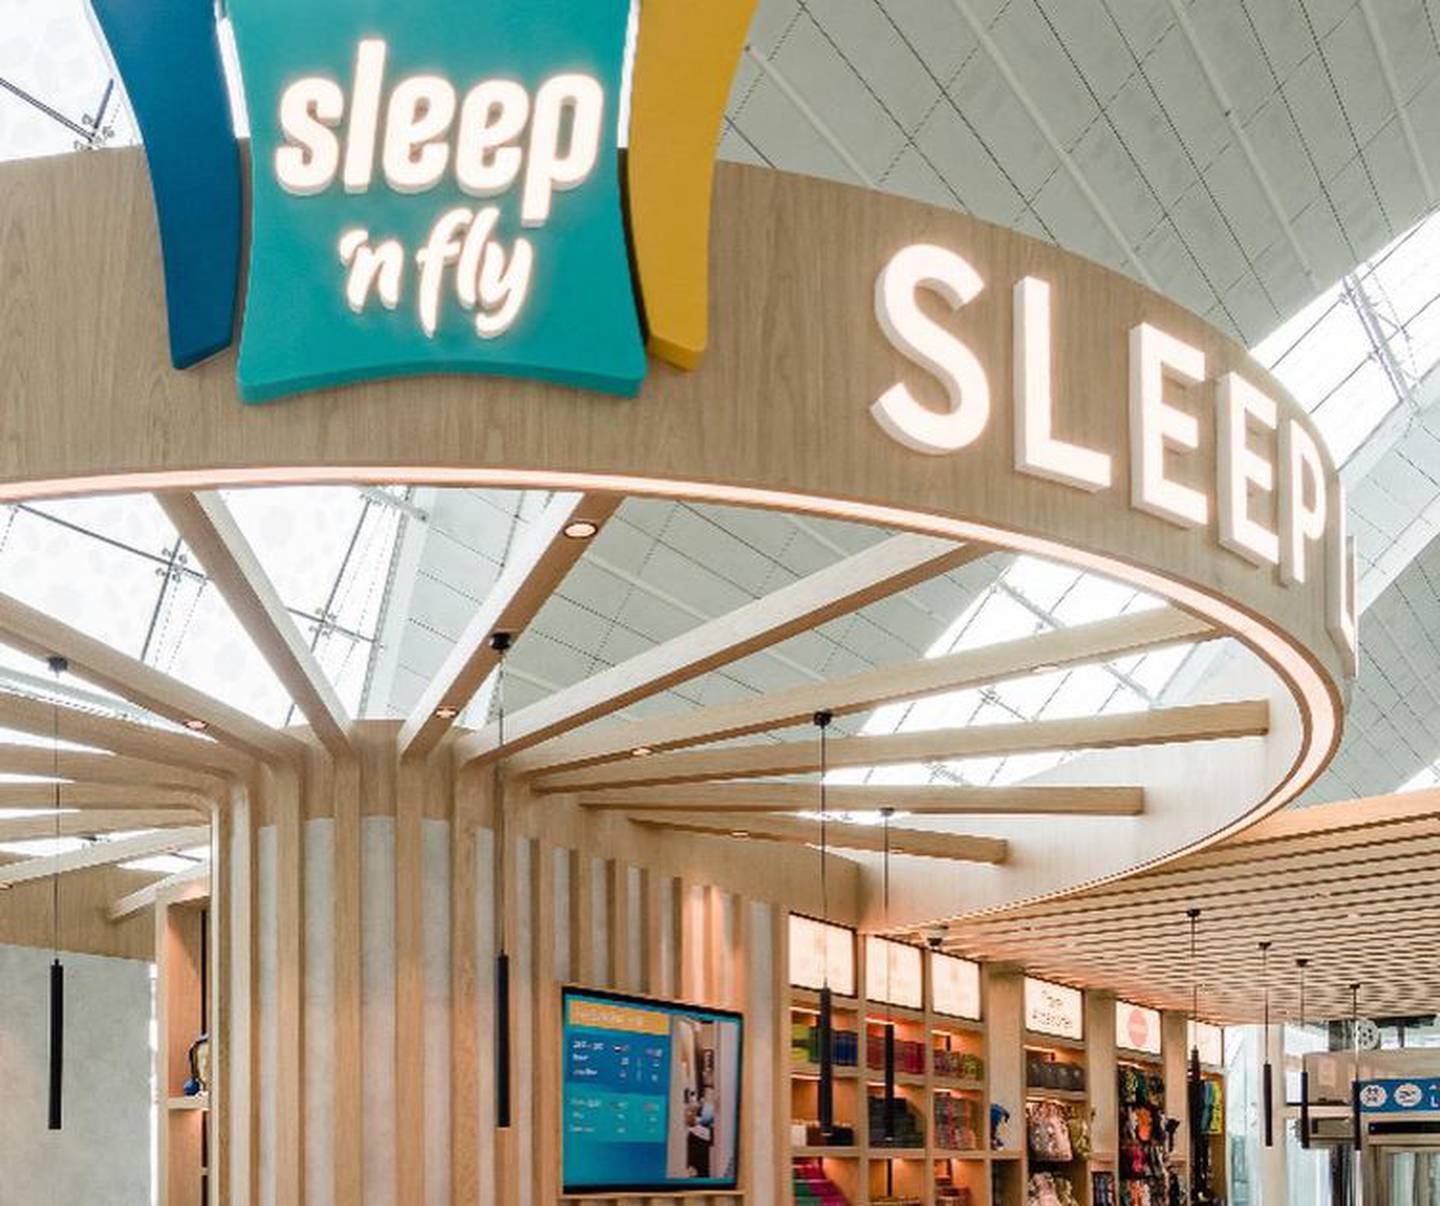 The new sleep 'n fly offers pods, cabins and lounge access for travellers. Photo: Airport Dimensions